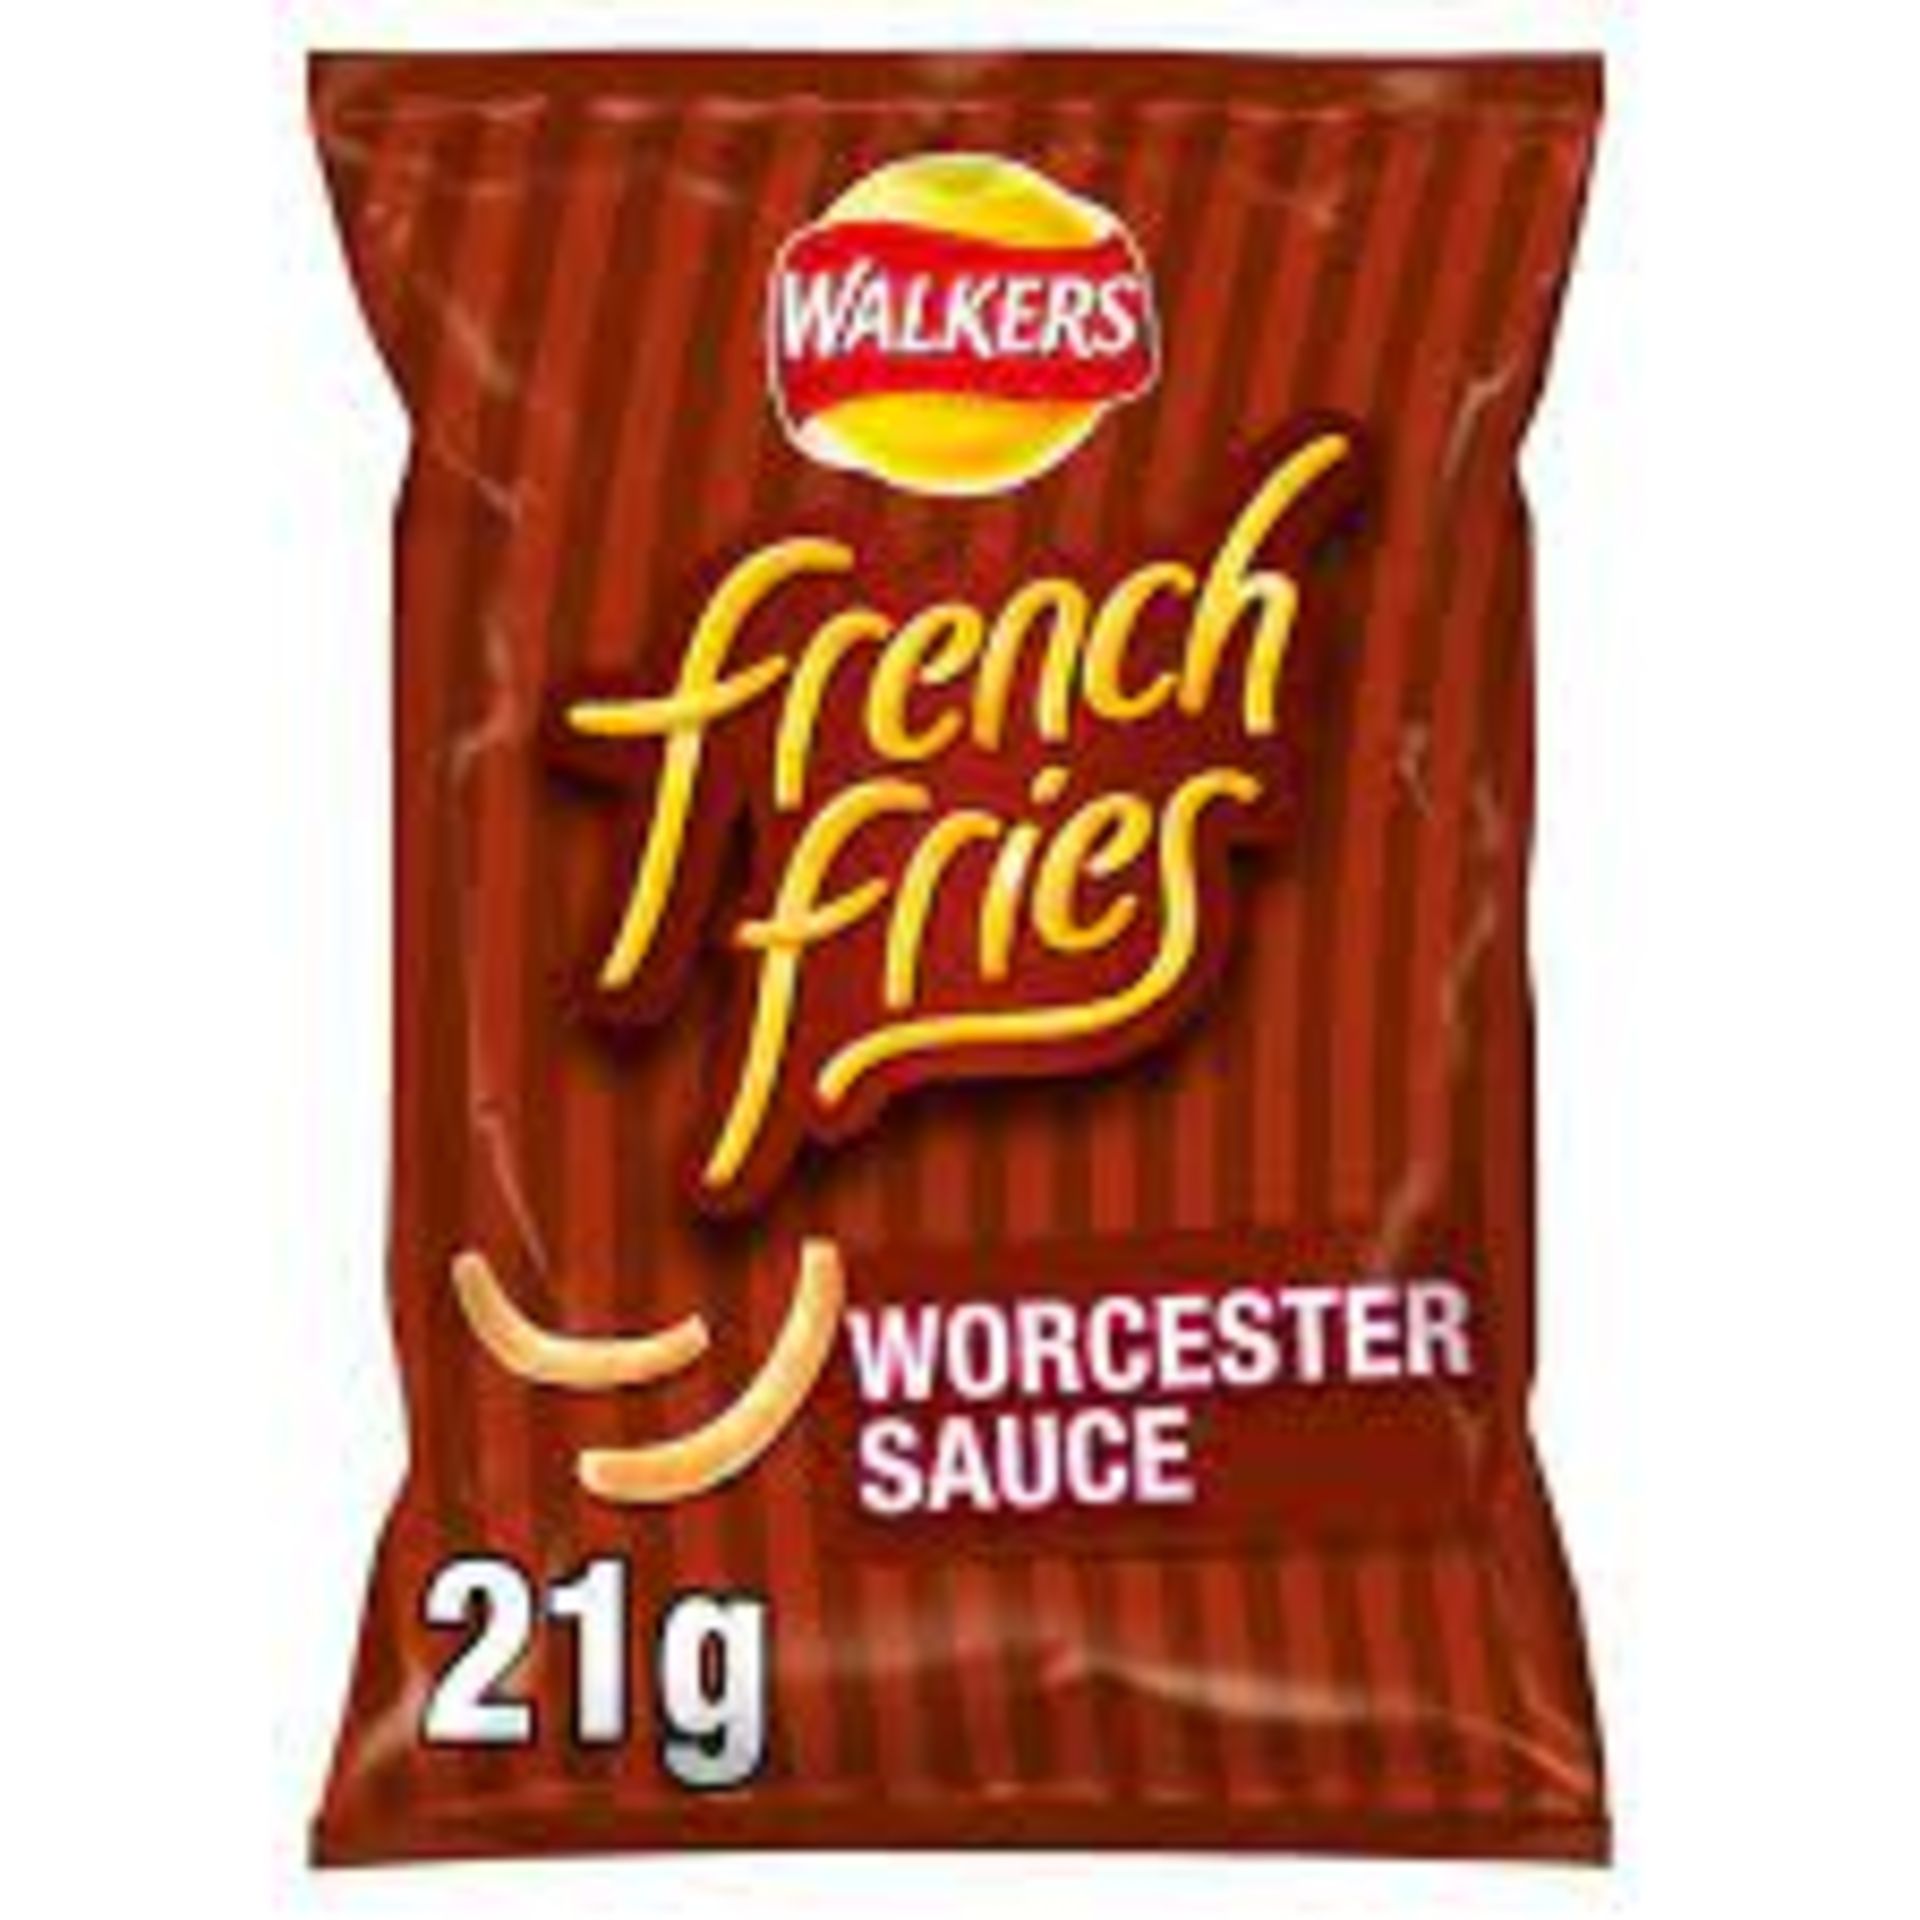 RRP £432 (Approx. Count 36) spW57p7134w 36 x Walkers French Fries Worcester Sauce Snacks, 21g (